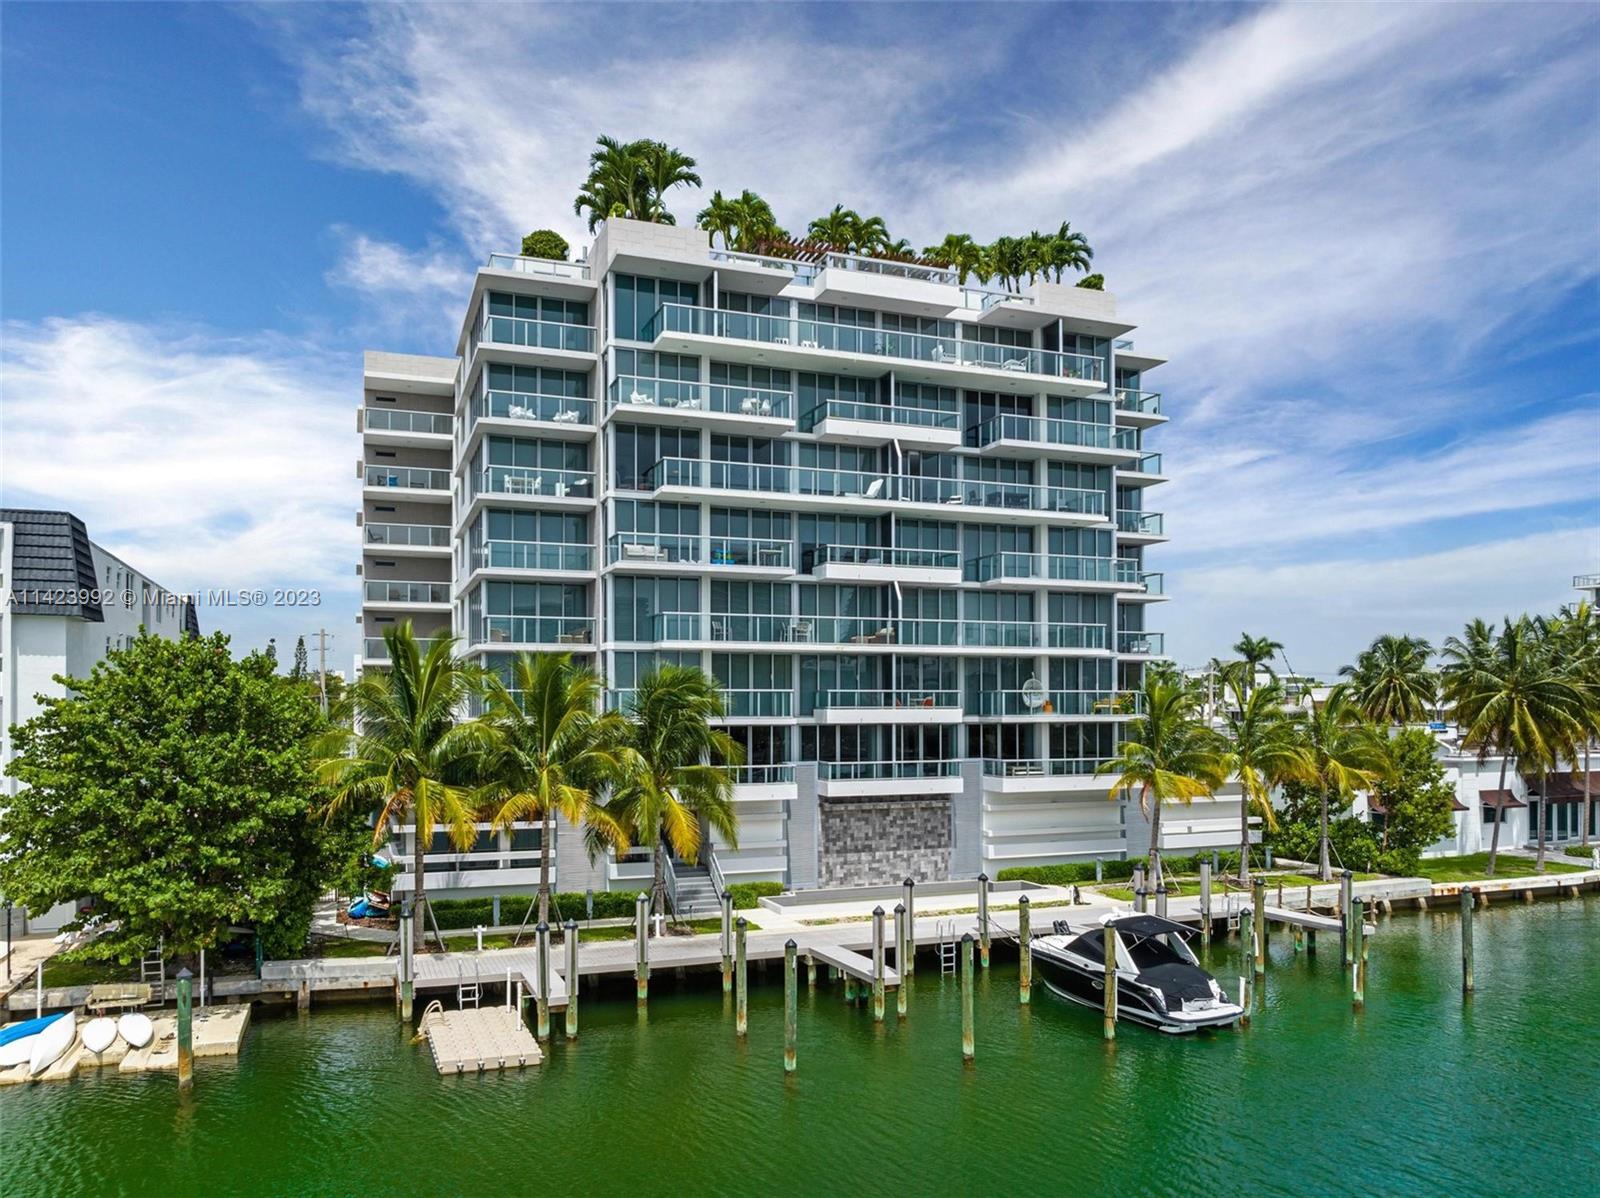 Welcome to this corner 2 bed 2 bath home at Bijou Bay Harbor, a waterfront new dev built in 2021. Unit features split floor plan with 9ft floor to ceiling windows with a lot of natural light, Italian designed MiaCucina kitchen, top of the line SubZero & Wolf appliances, & ample bedrooms. Primary bedroom has a walk-in closet with a dual vanity bathroom, while secondary bedroom also fits a king size bed. Unit comes with 2 assigned, covered garage spaces plus a storage. The building offers 24/7 security, a rooftop pool & lounge, gym, bayfront lounge, boat dock spaces with open water access, & more! Centrally located in desirable Bay Harbor within walking distance of restaurants, shops, A-Rated school, the beach, famous Bal Harbour Shops, and easy access to Miami Beach and Downtown. MOTIVATED!